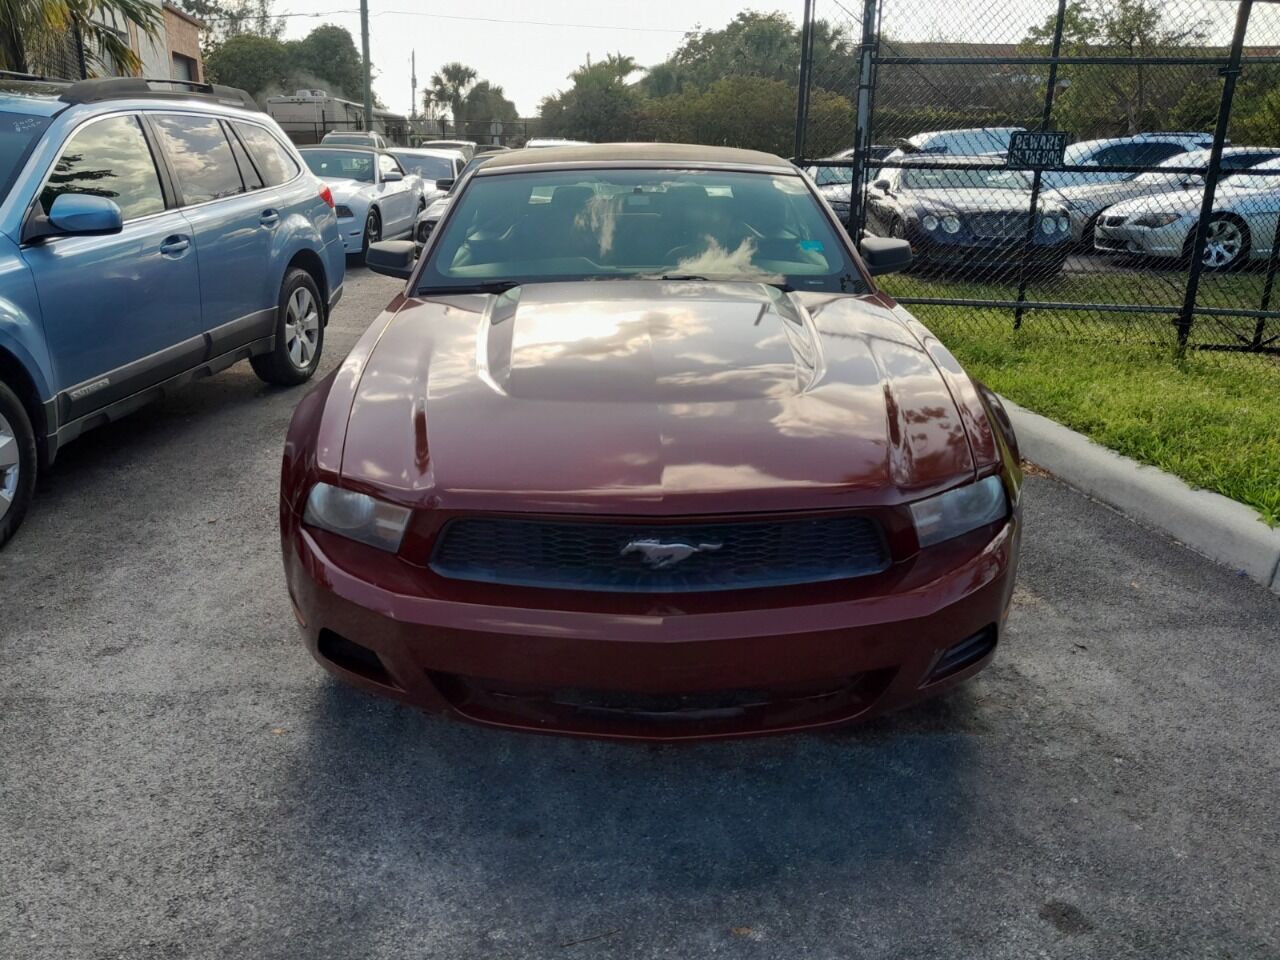 2012 FORD Mustang Convertible - $6,450